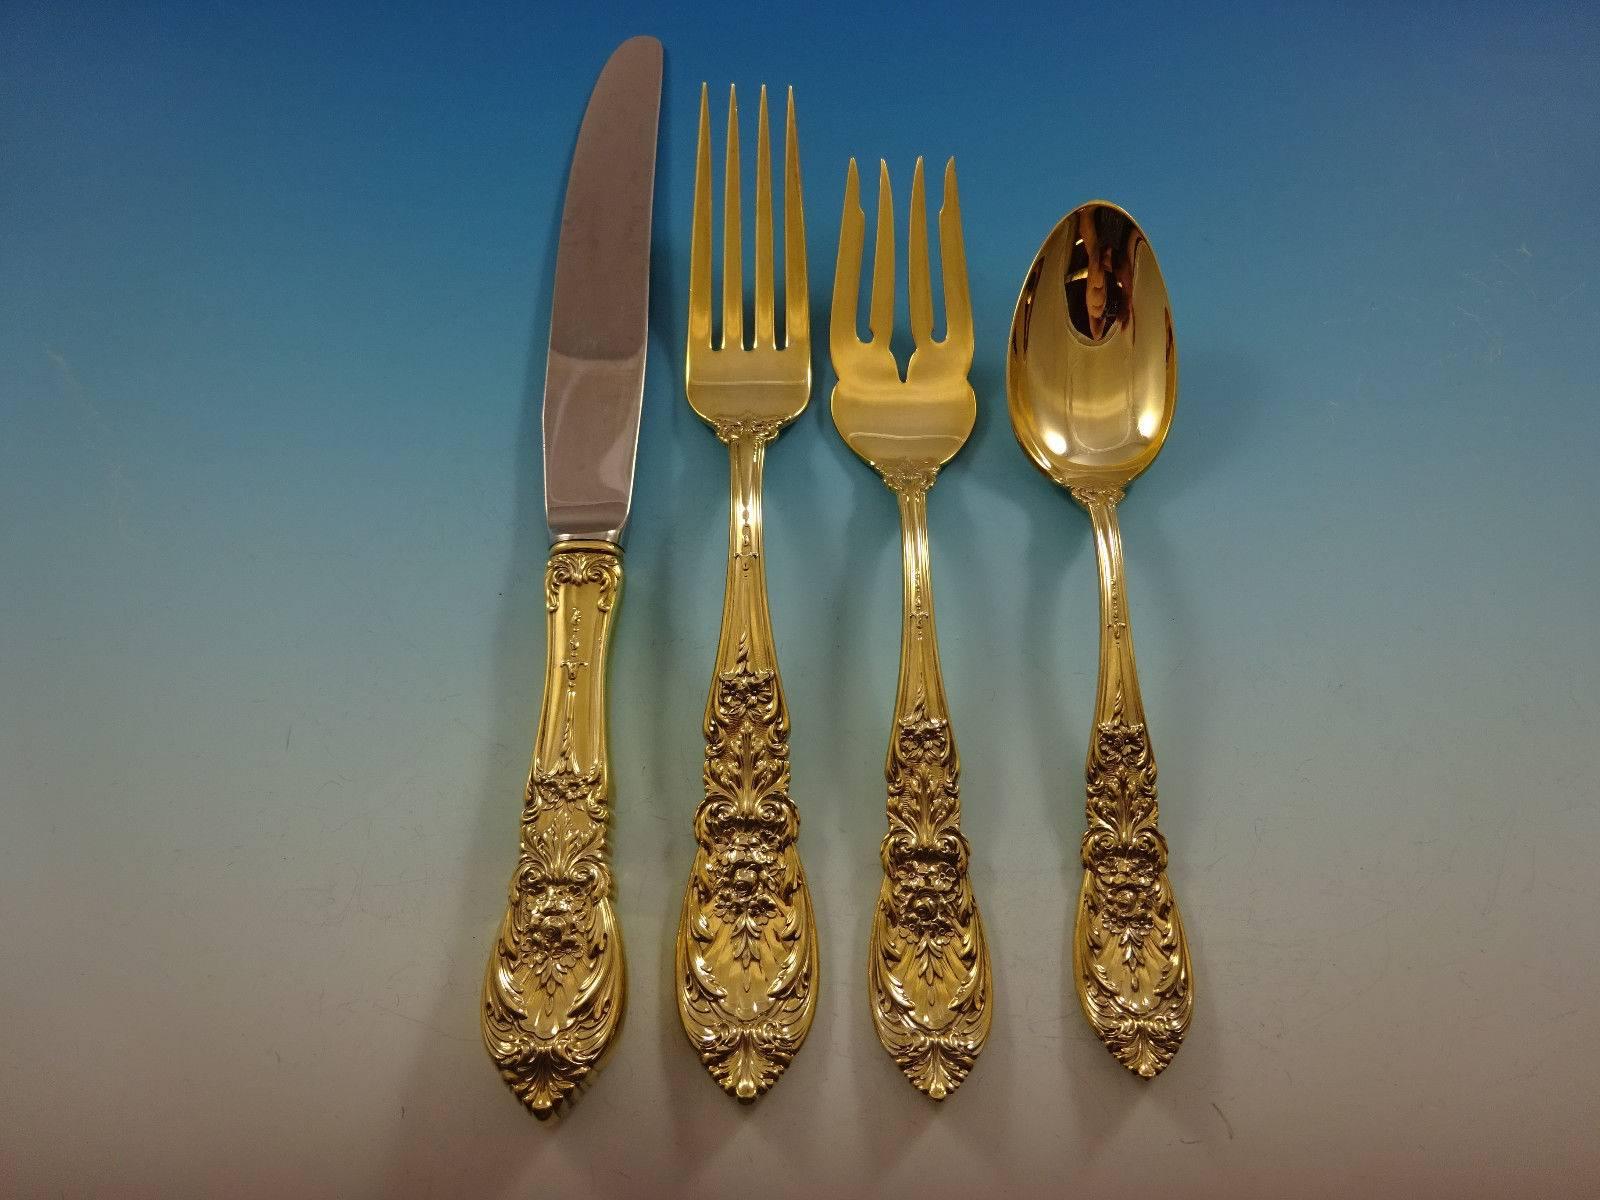 Add some luxe to your life with this fabulous Richelieu Gold by International sterling silver flatware set - 48 pieces. Gold flatware is on trend and makes a bold statement on your table. 

This set is vermeil (completely gold-washed) and includes:
